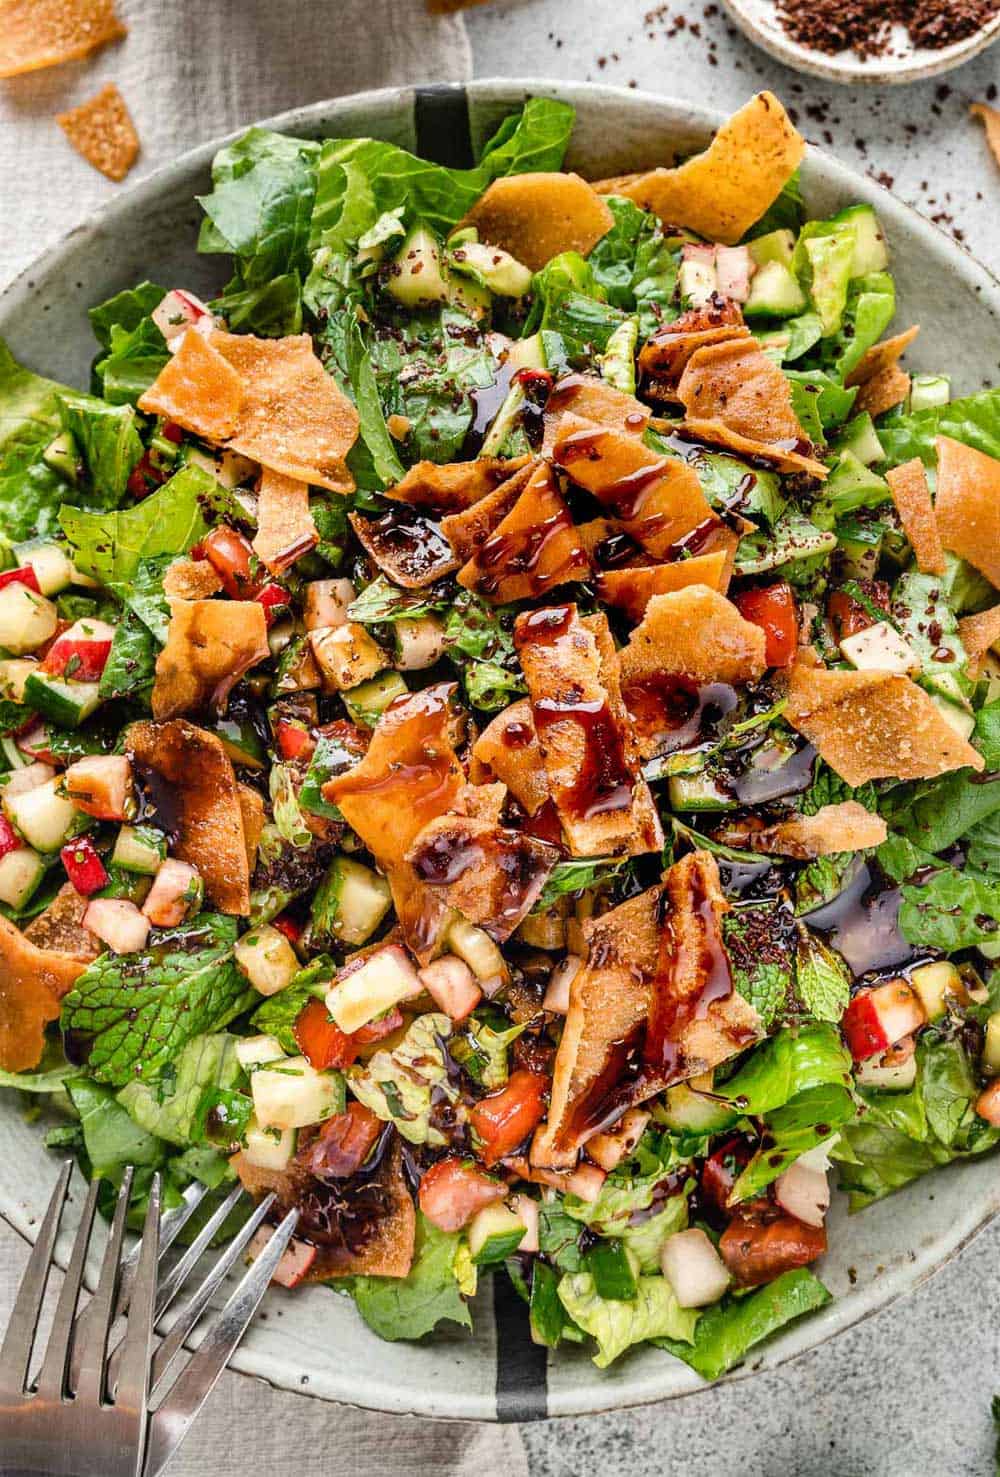 Fattoush Salad served in a large grey bowl, topped with crispy pita bread chips and drizzled with sweet and tangy pomegranate molasses dressing.